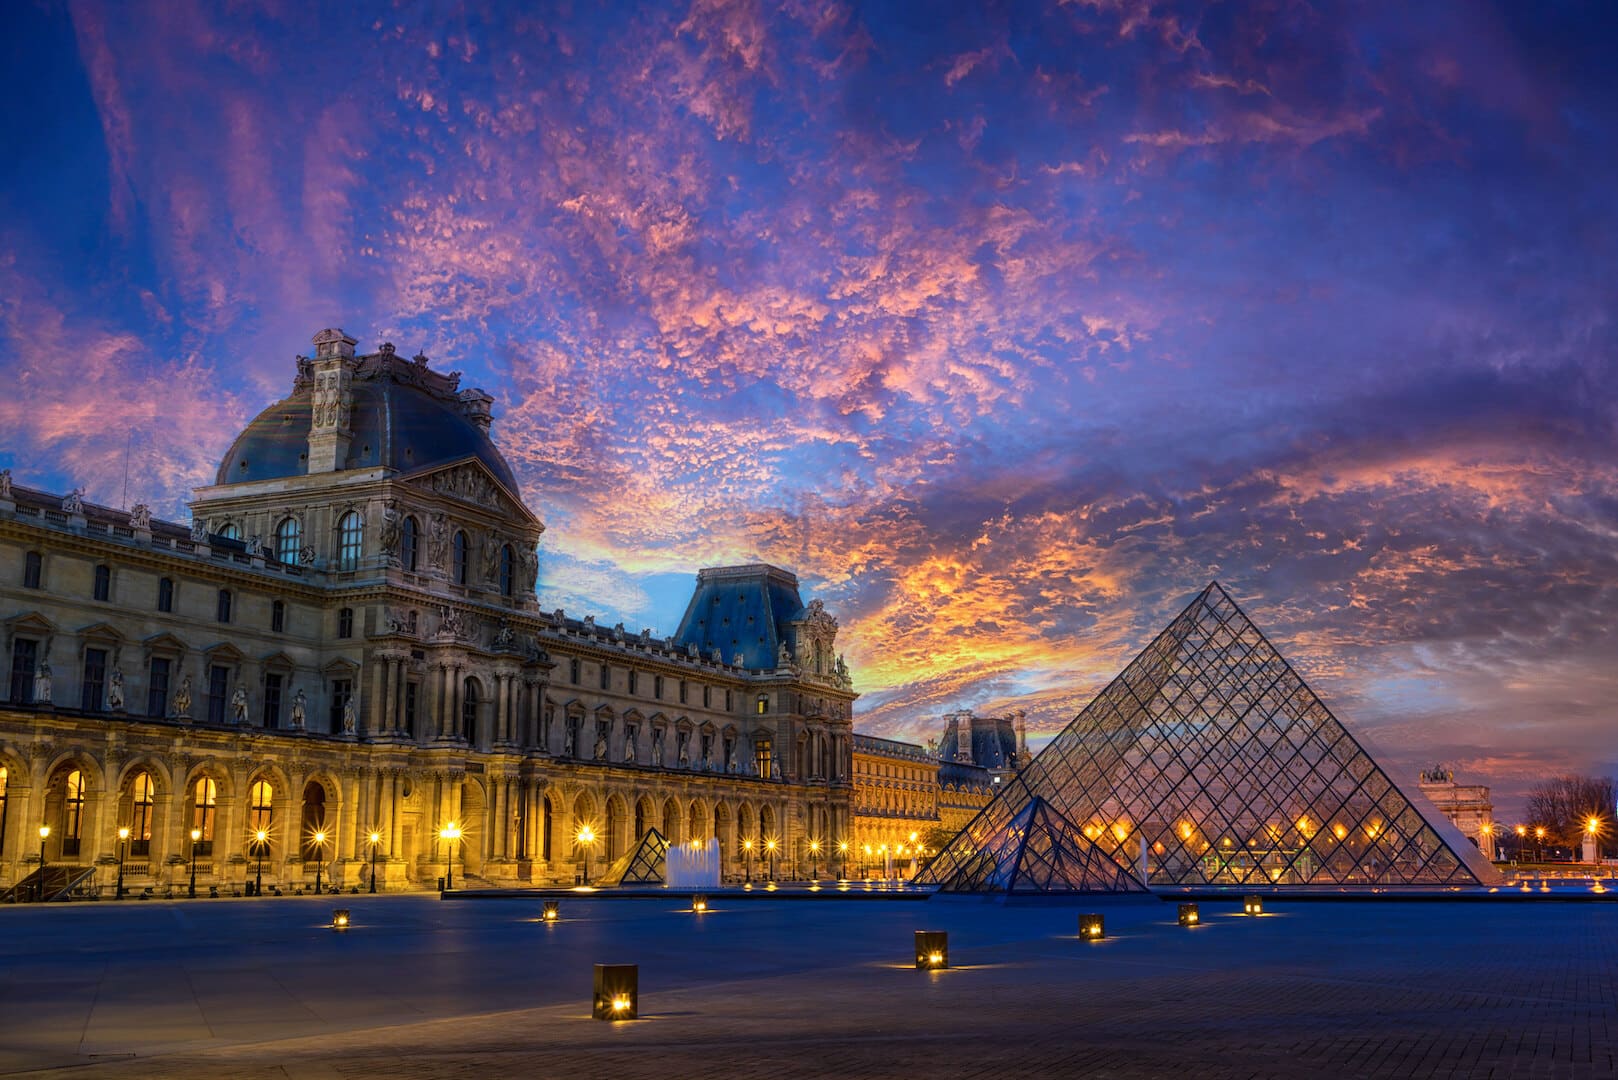 Get the most out of your Friday night in Paris.